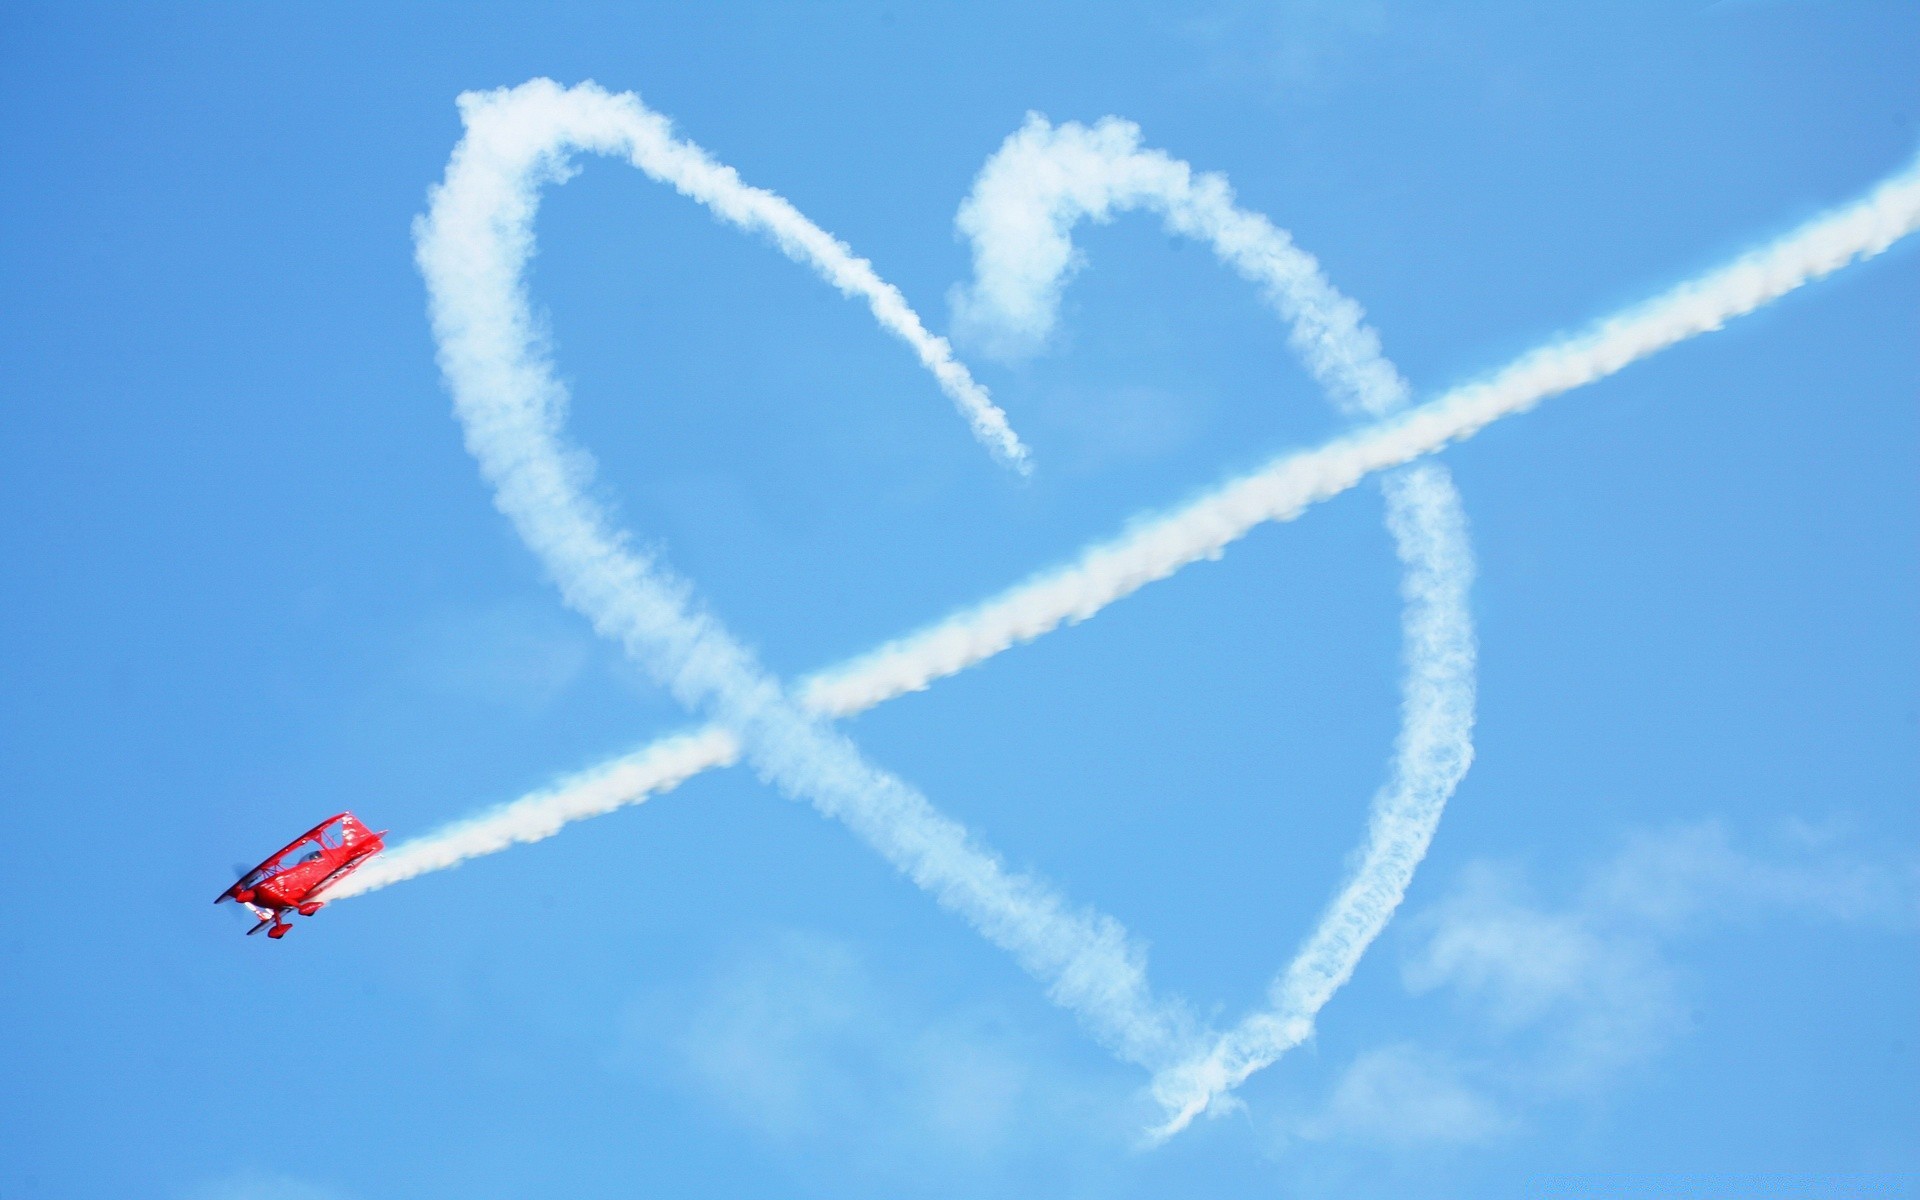 valentine s day aircraft airplane jet precision fly air geological formation smoke flight military fighter speed aerobatics force fast teamwork maneuver sky show